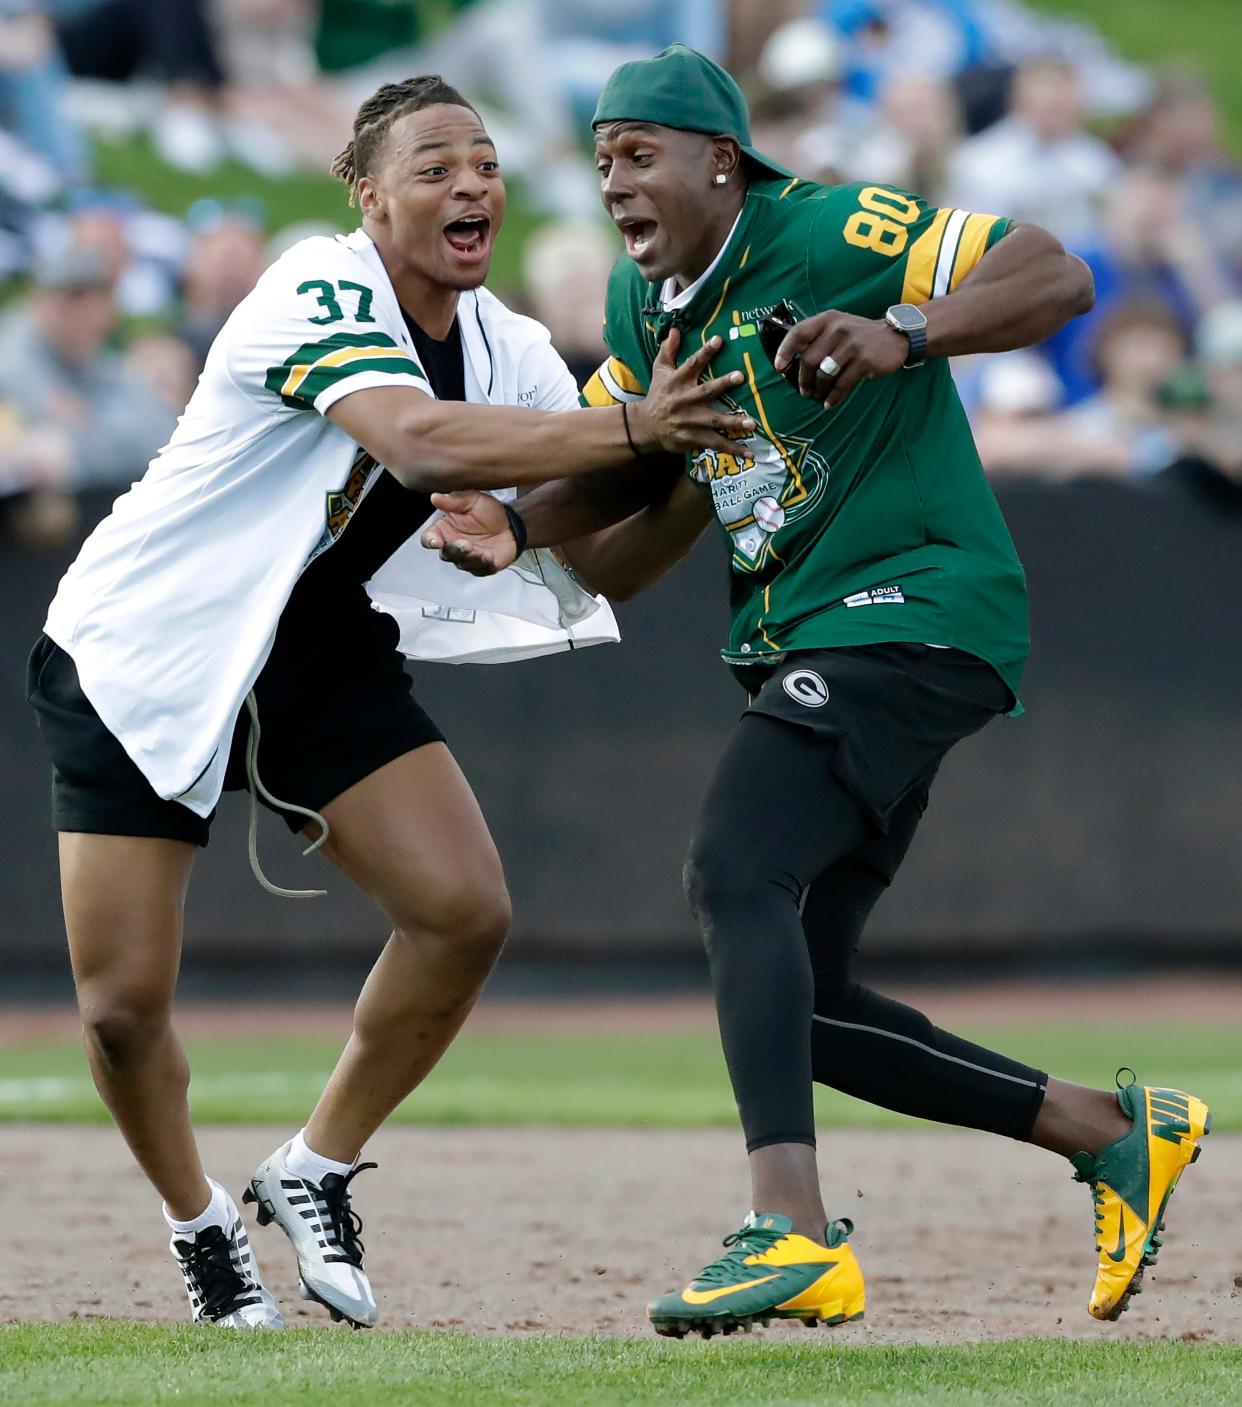 Packers cornerback Carrington Valentine (37) tries to slow down Donald Driver between second and third base during the Green Bay Charity Softball Game on Friday at Neuroscience Group Field at Fox Cities Stadium in Grand Chute.